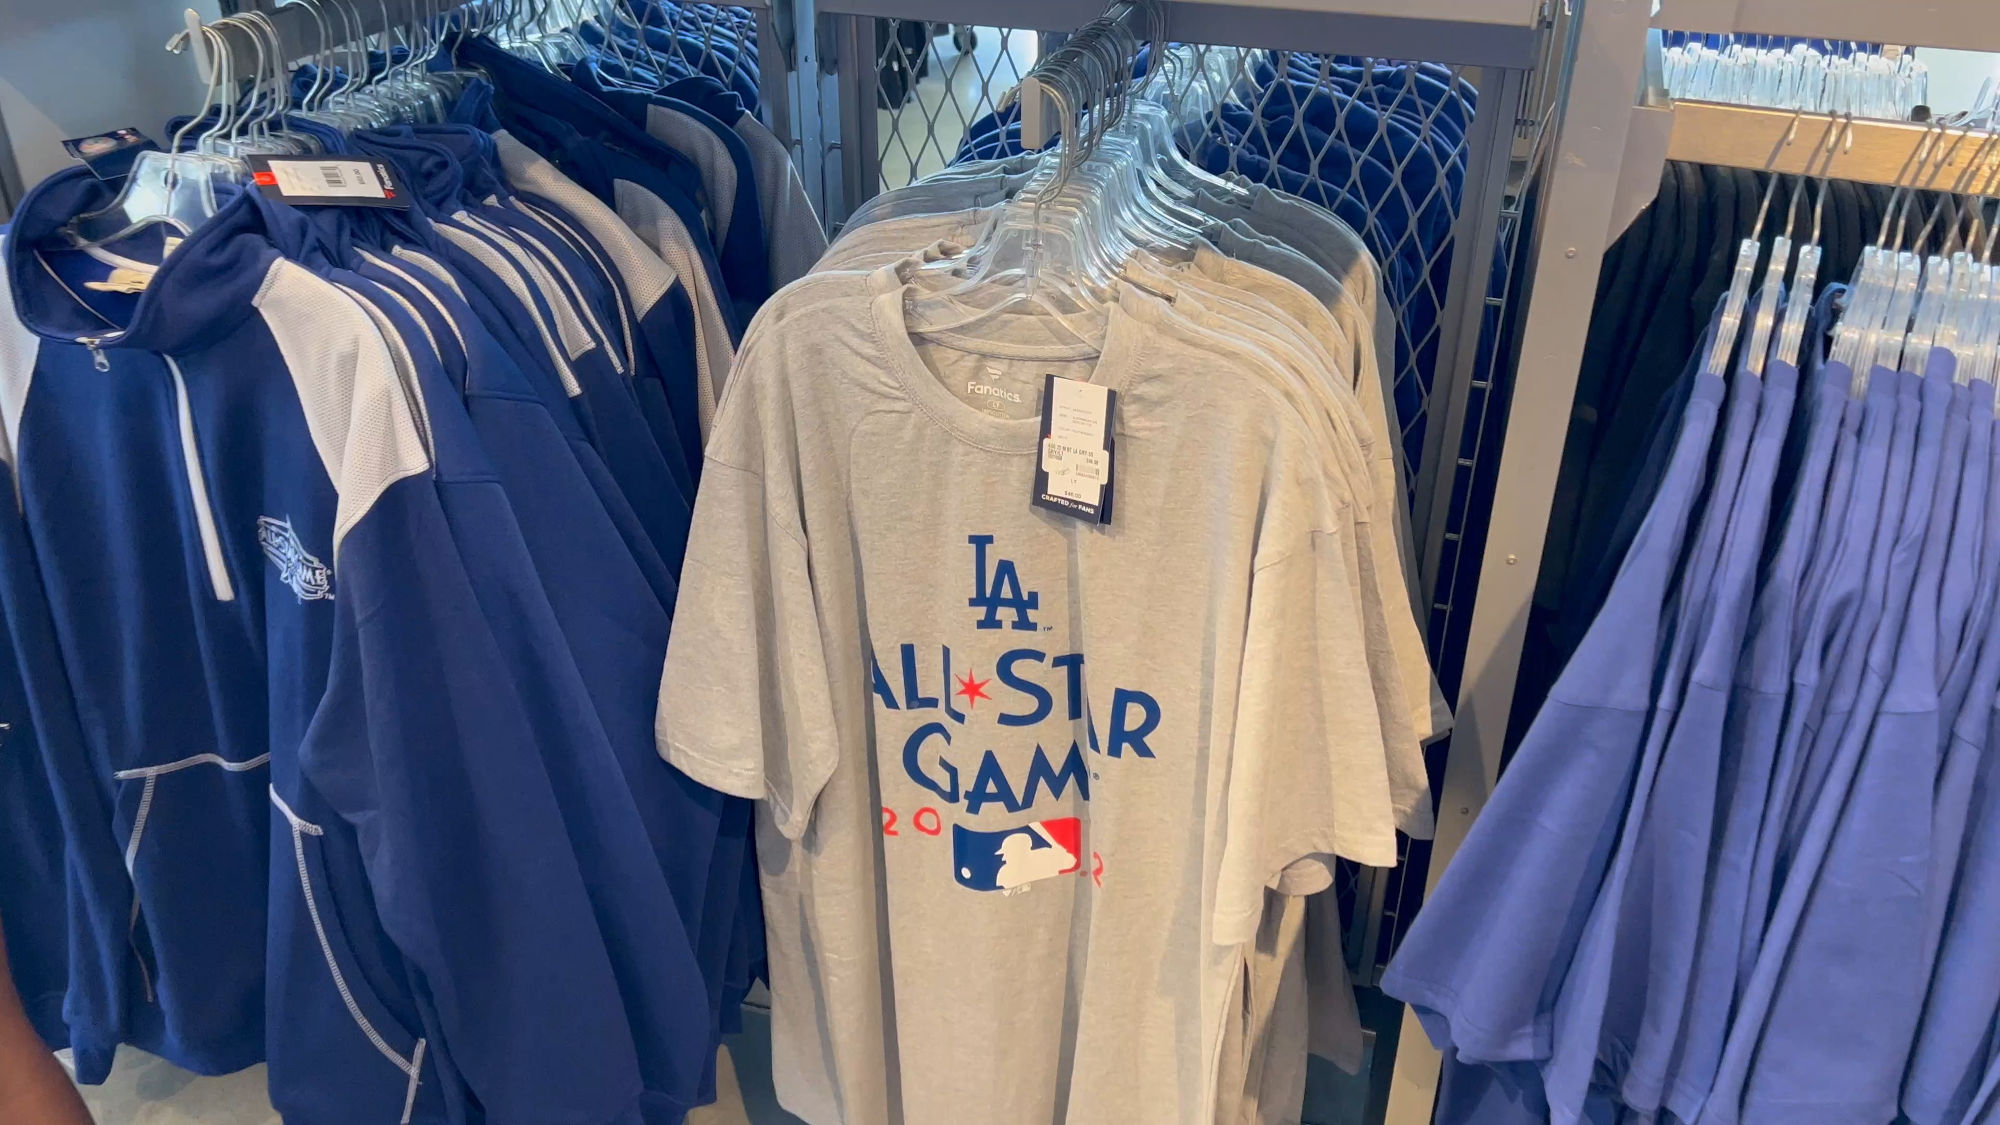 All Star Game 2022 Shirts